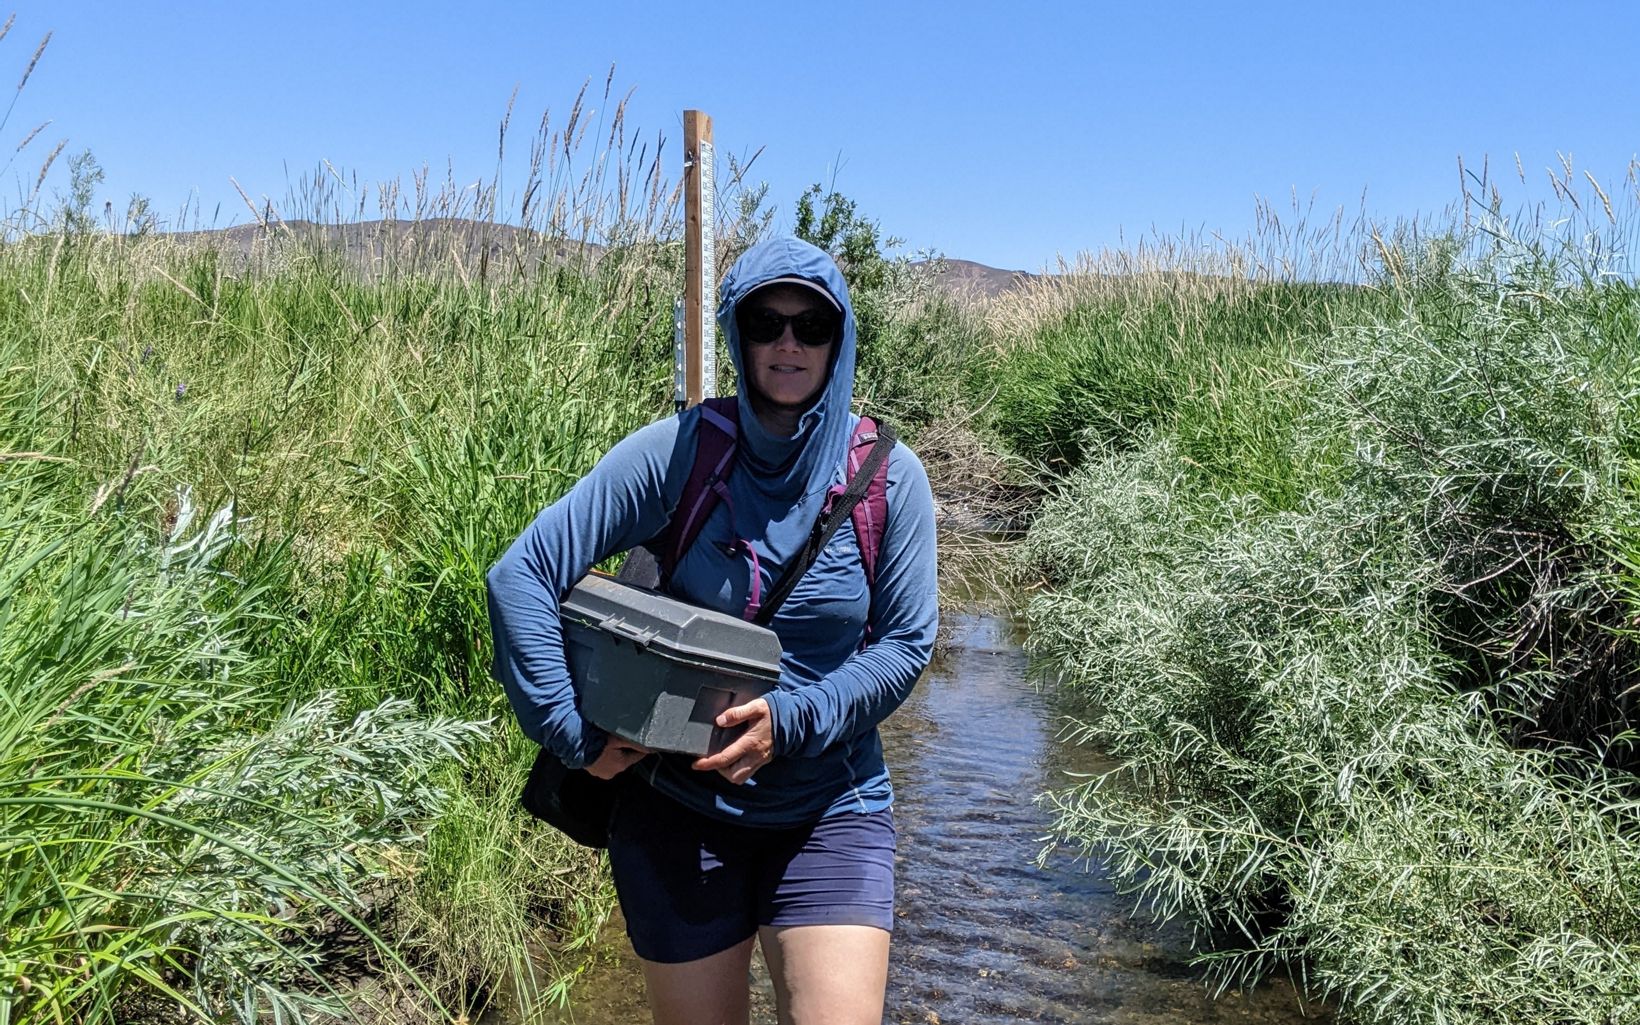 A staff member holds a streamflow measuring device while standing in a stream in a grassy field on a sunny day.